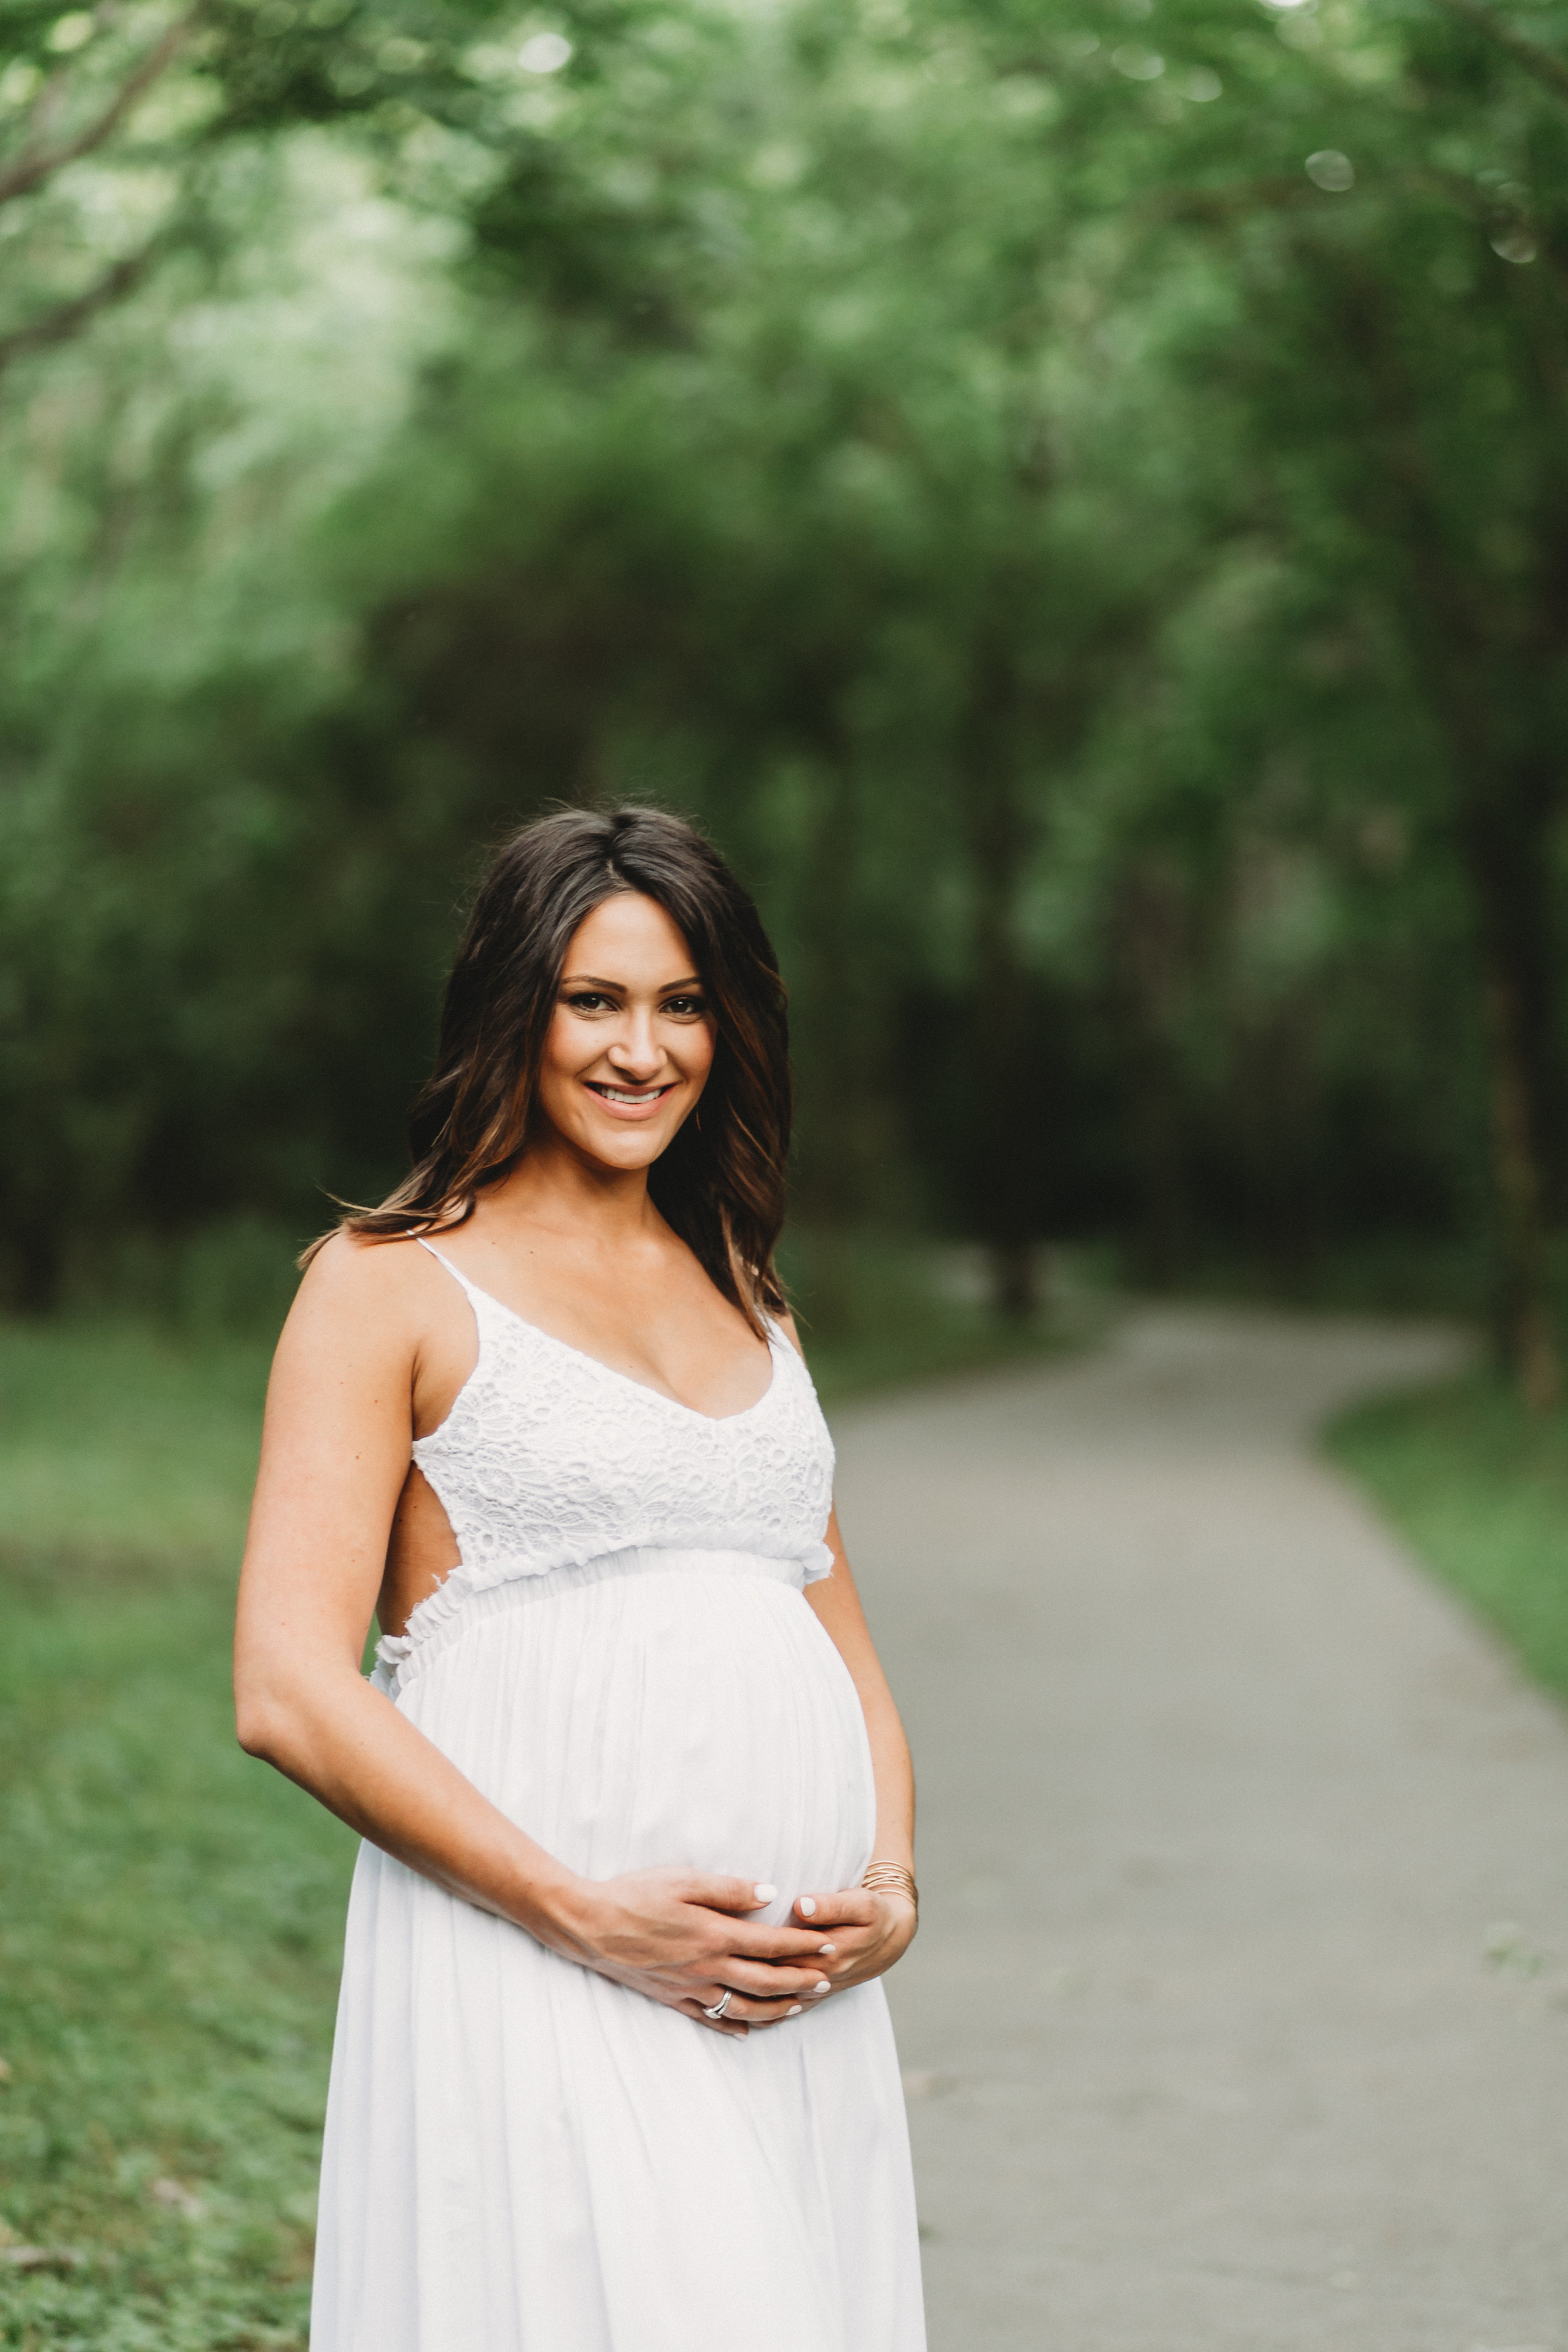 Nashville Maternity Photography | Natalie — Kailee Riches Photography